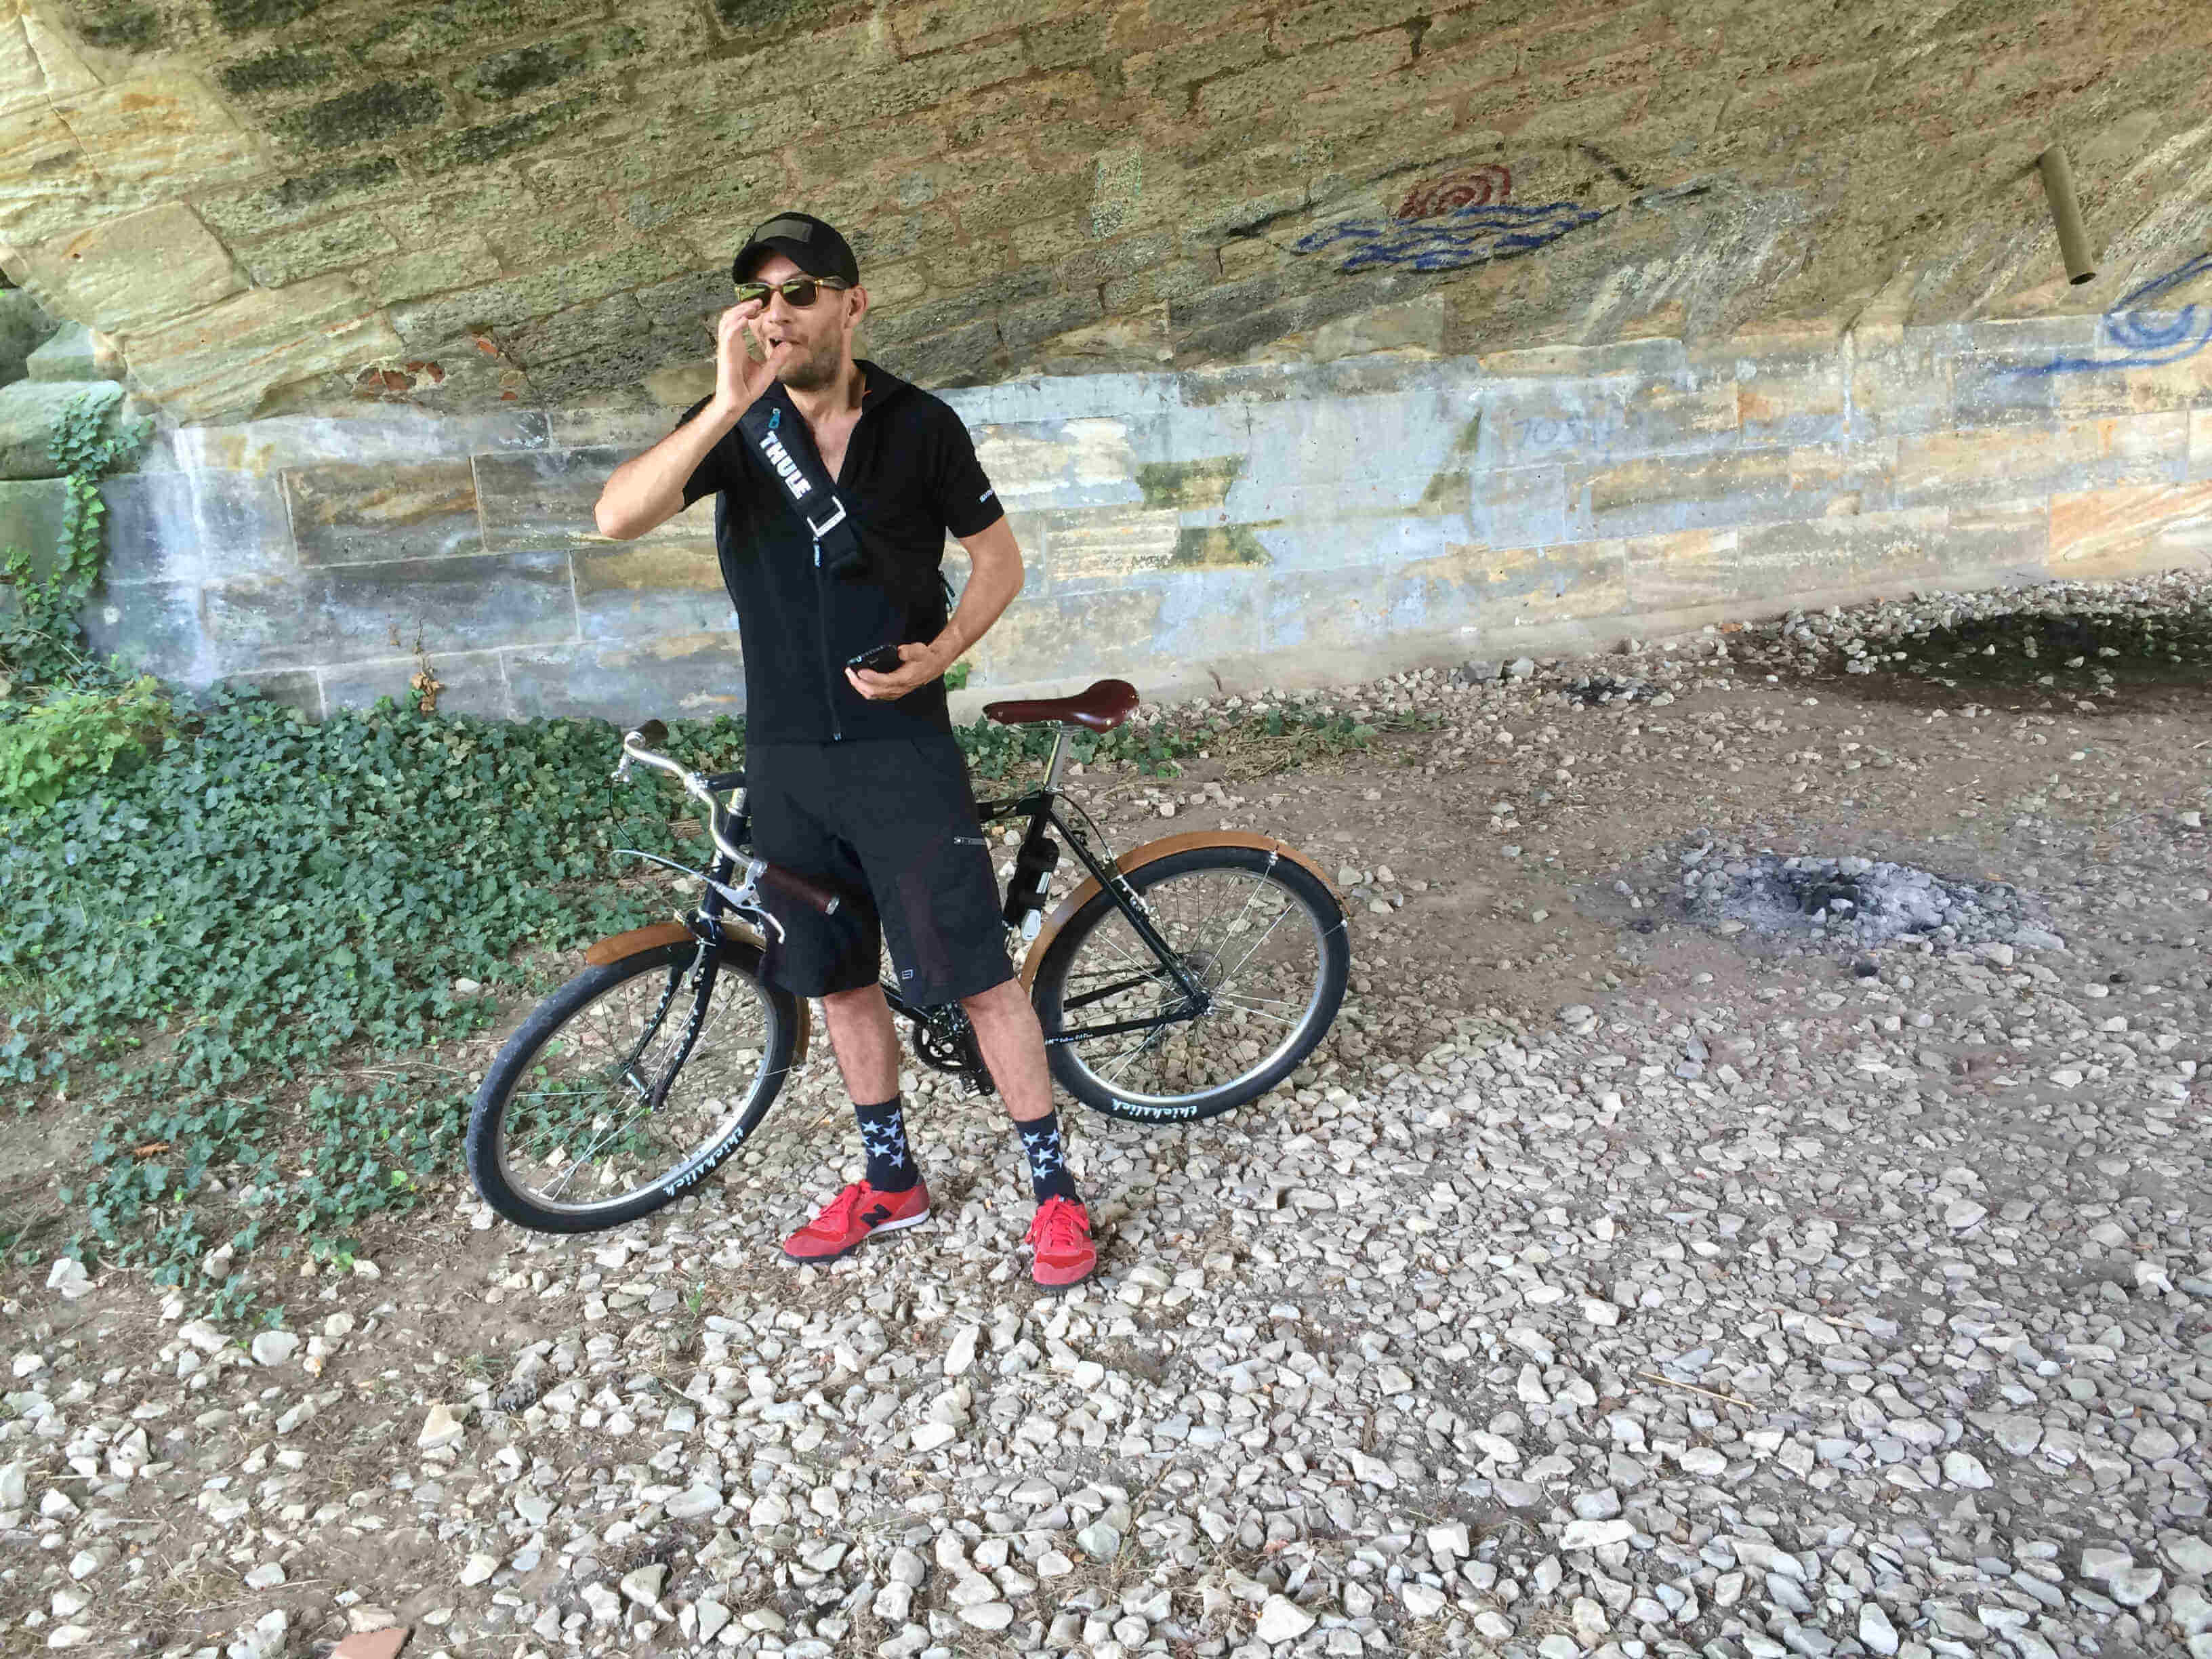 Front view of a cyclist, standing in front of the left side of a black Surly bike, on gravel under a stone overpass